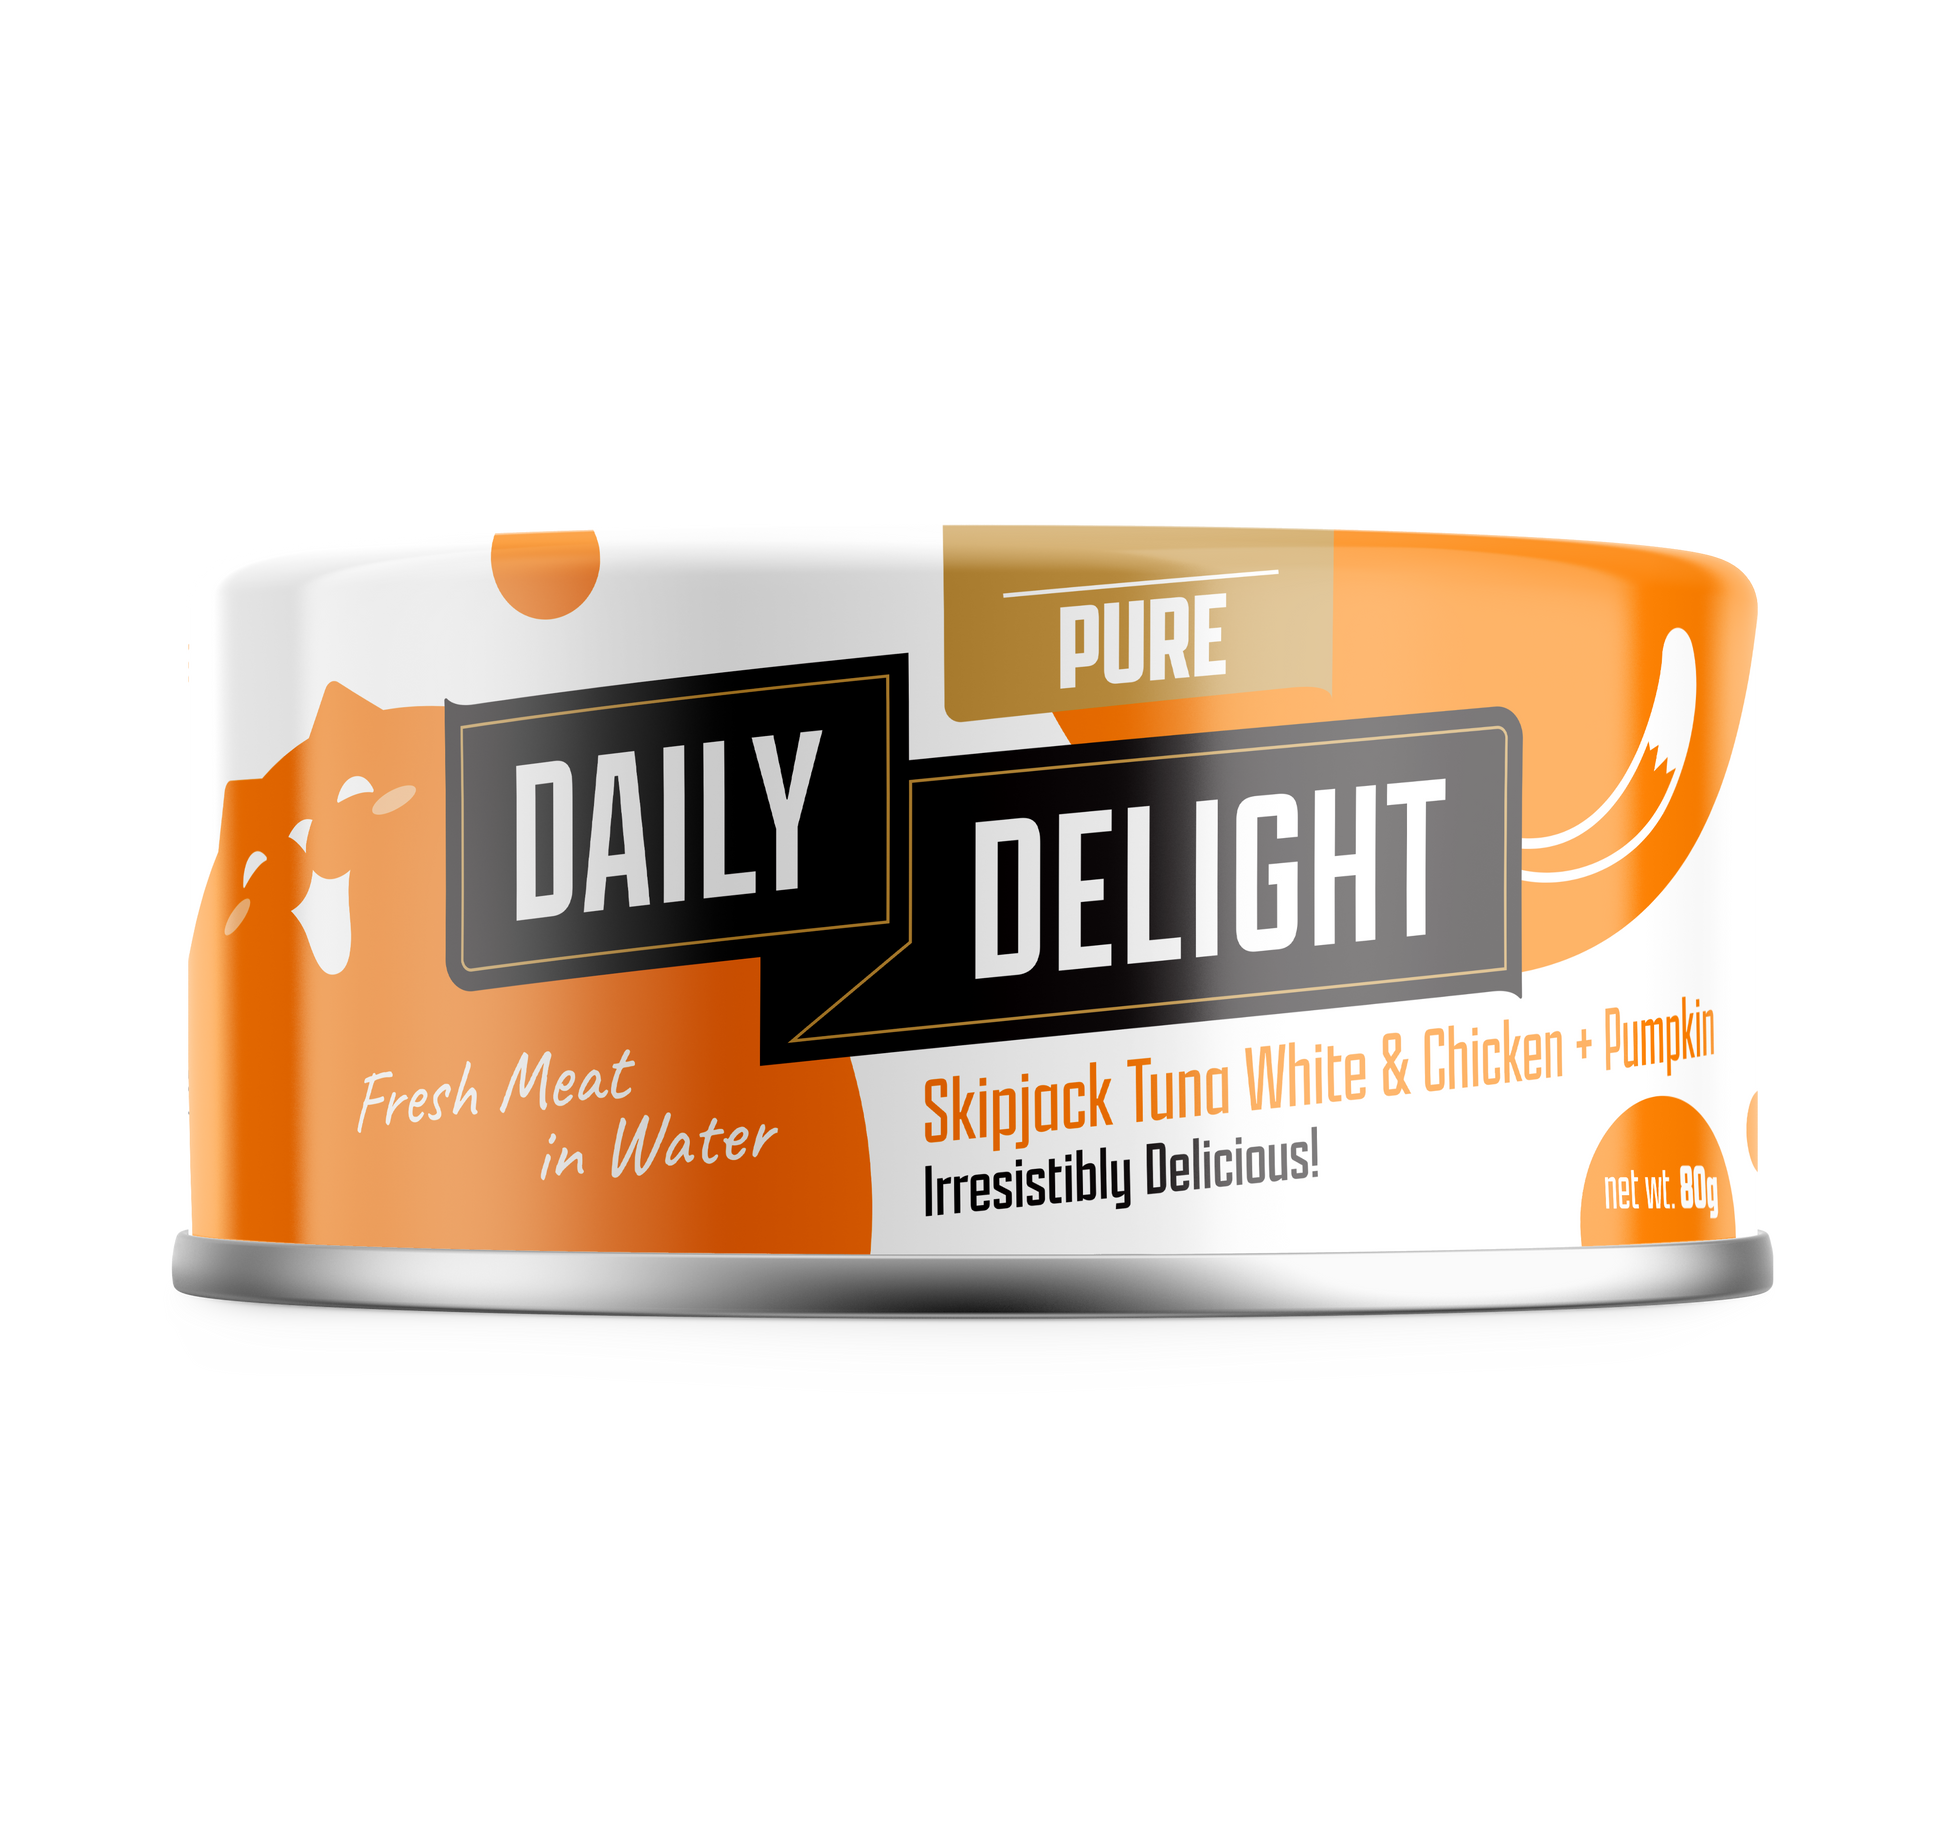 Daily Delight Pure Skipjack Tuna White & Chicken with Pumpkin 80g Carton (24 Cans)-Daily Delight-Catsmart-express